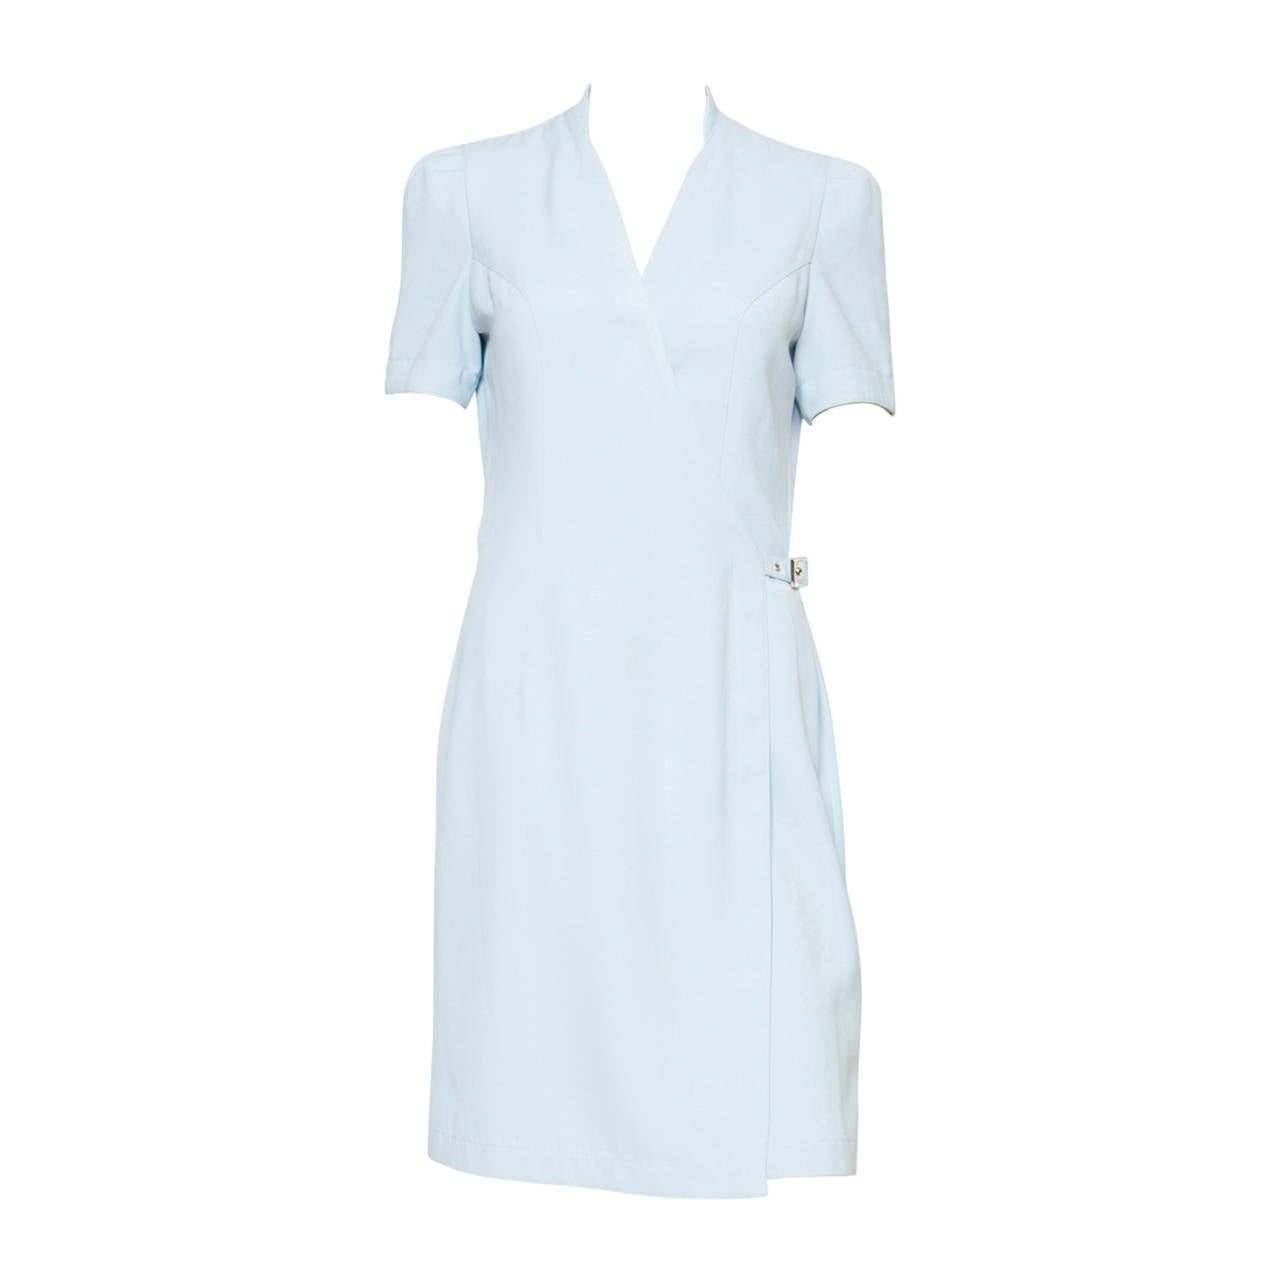 1990’s Light blue Thierry Mugler Dress For Sale at 1stdibs